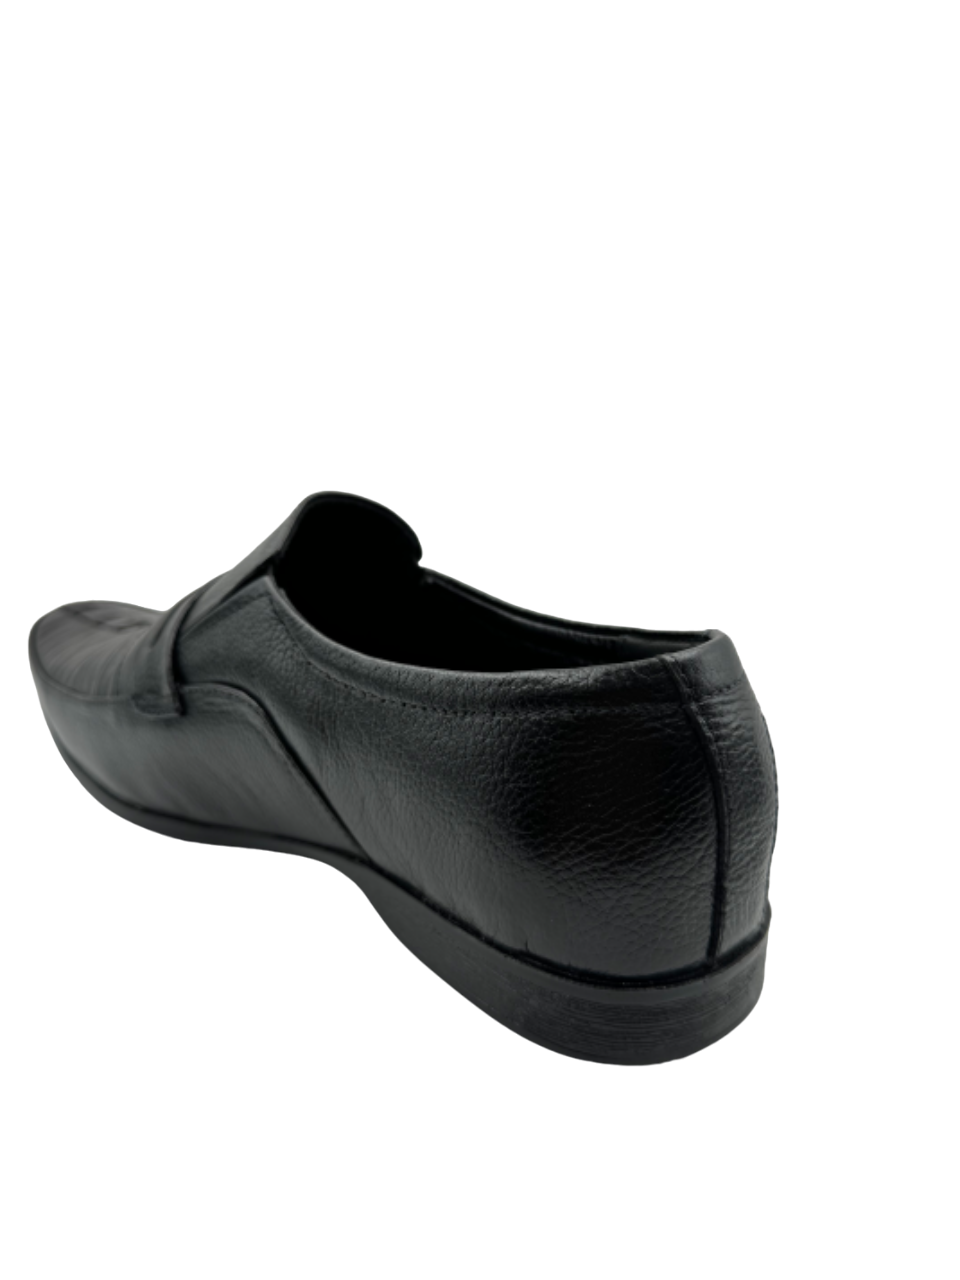 Ortho Soft Doctor Shoes GTSS 02